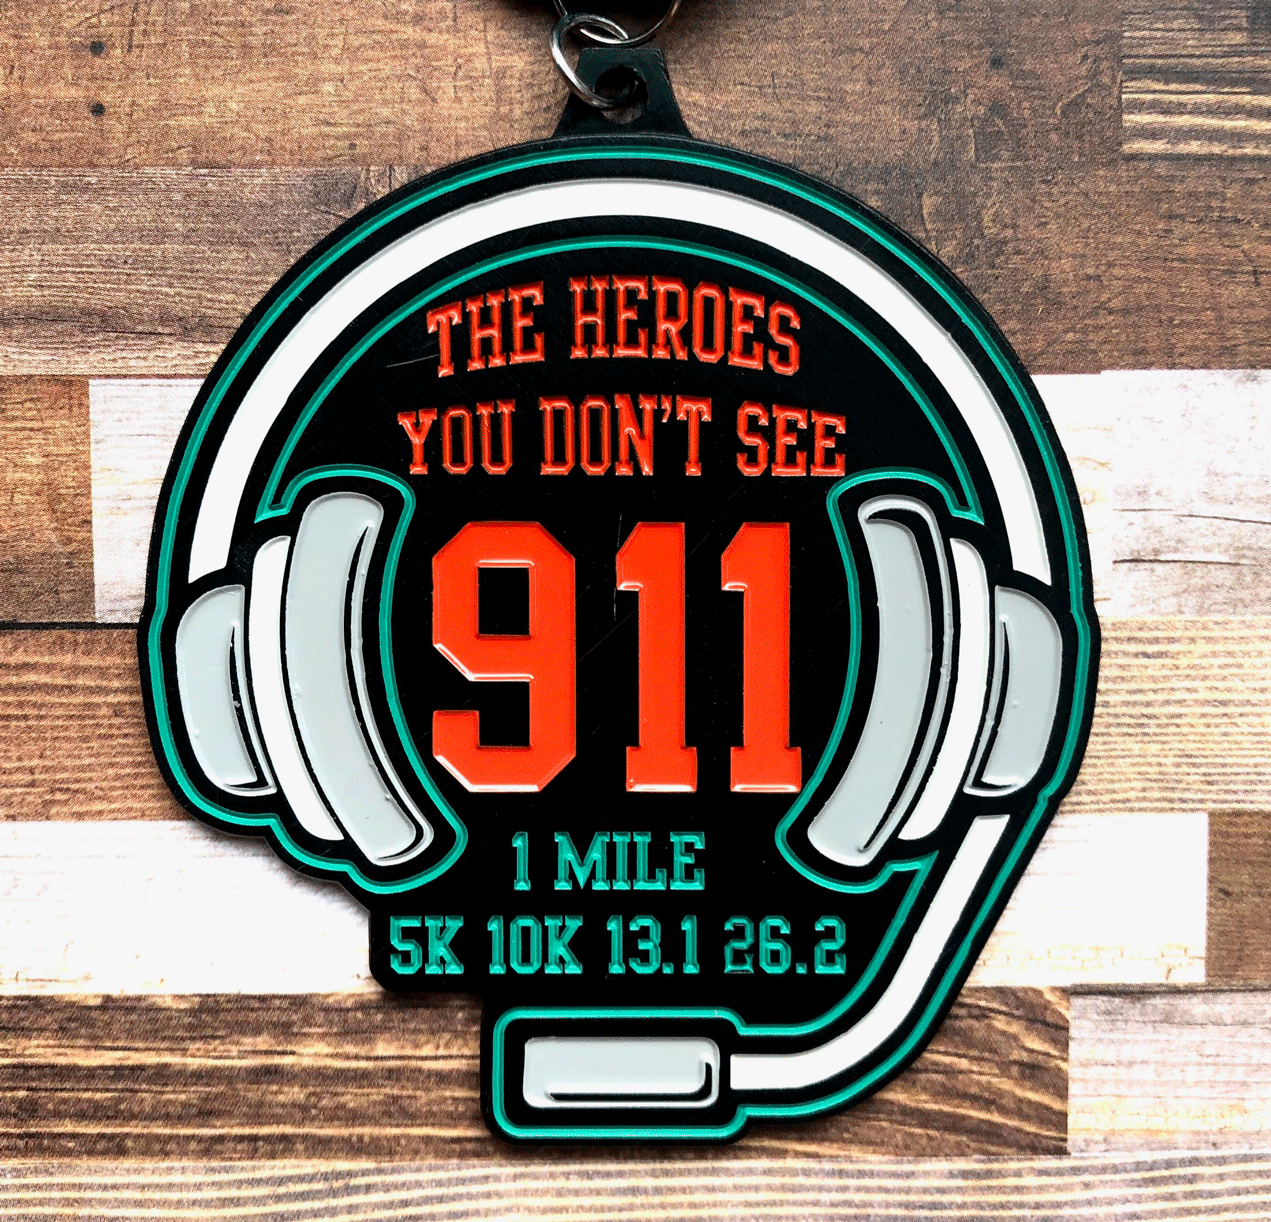 Only $9! The Heroes You Don't See 1 M 5K 10K 13.1 26.2 -Minneapolis